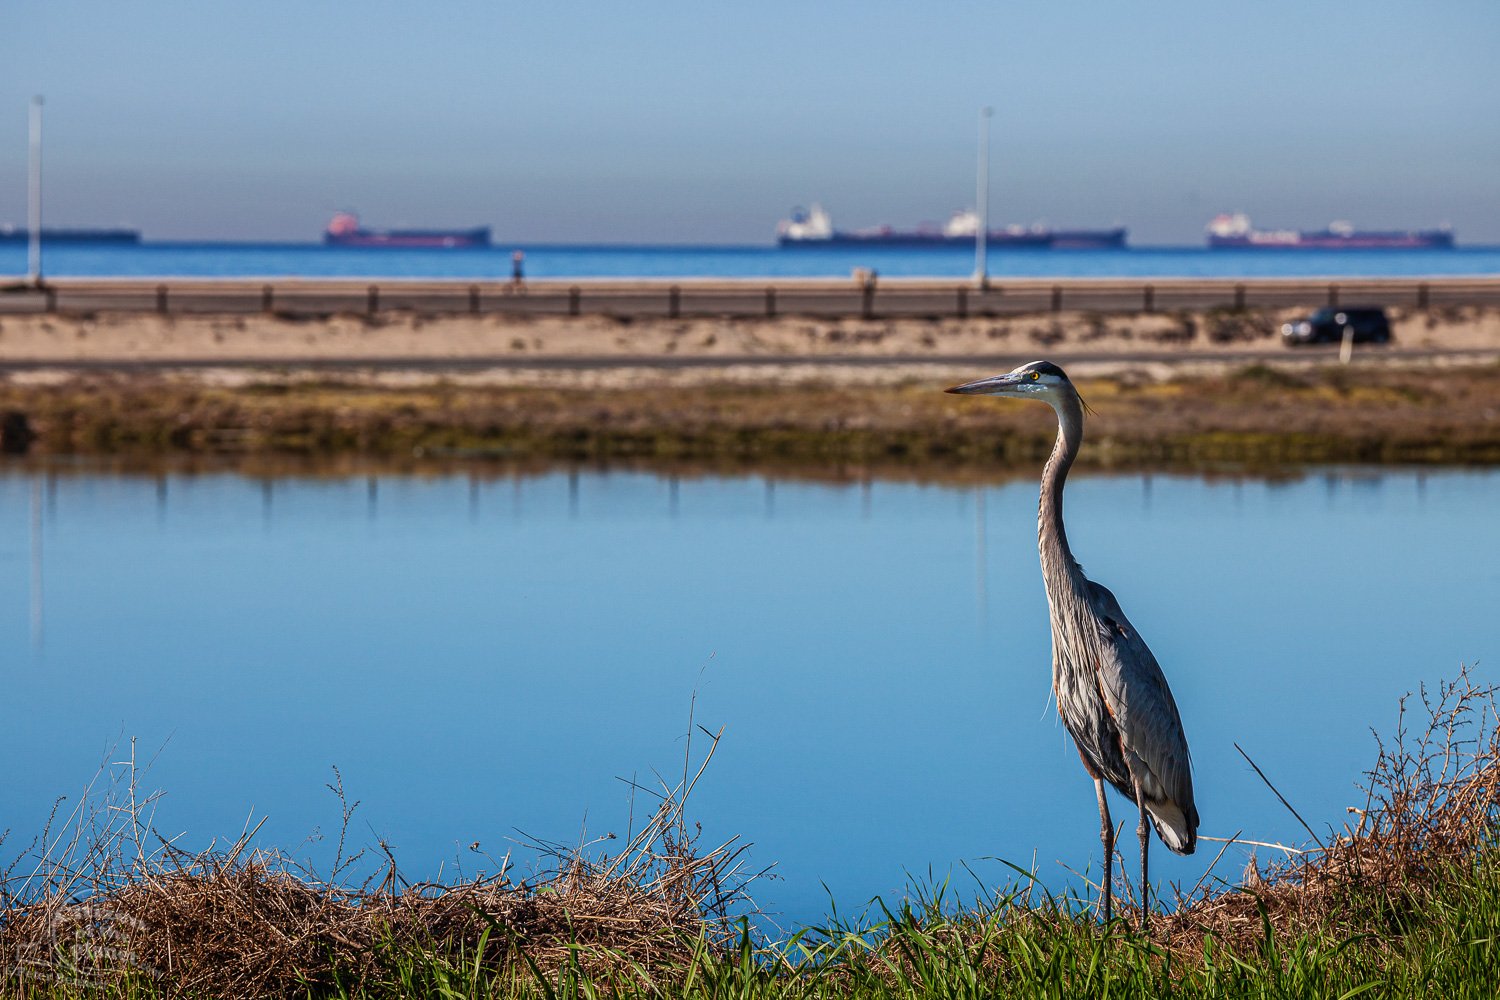  A Great Blue Heron stands in the Bolsa Chica Ecological Preserve with oil tankers sitting off the coast in the Catalina Channel. 